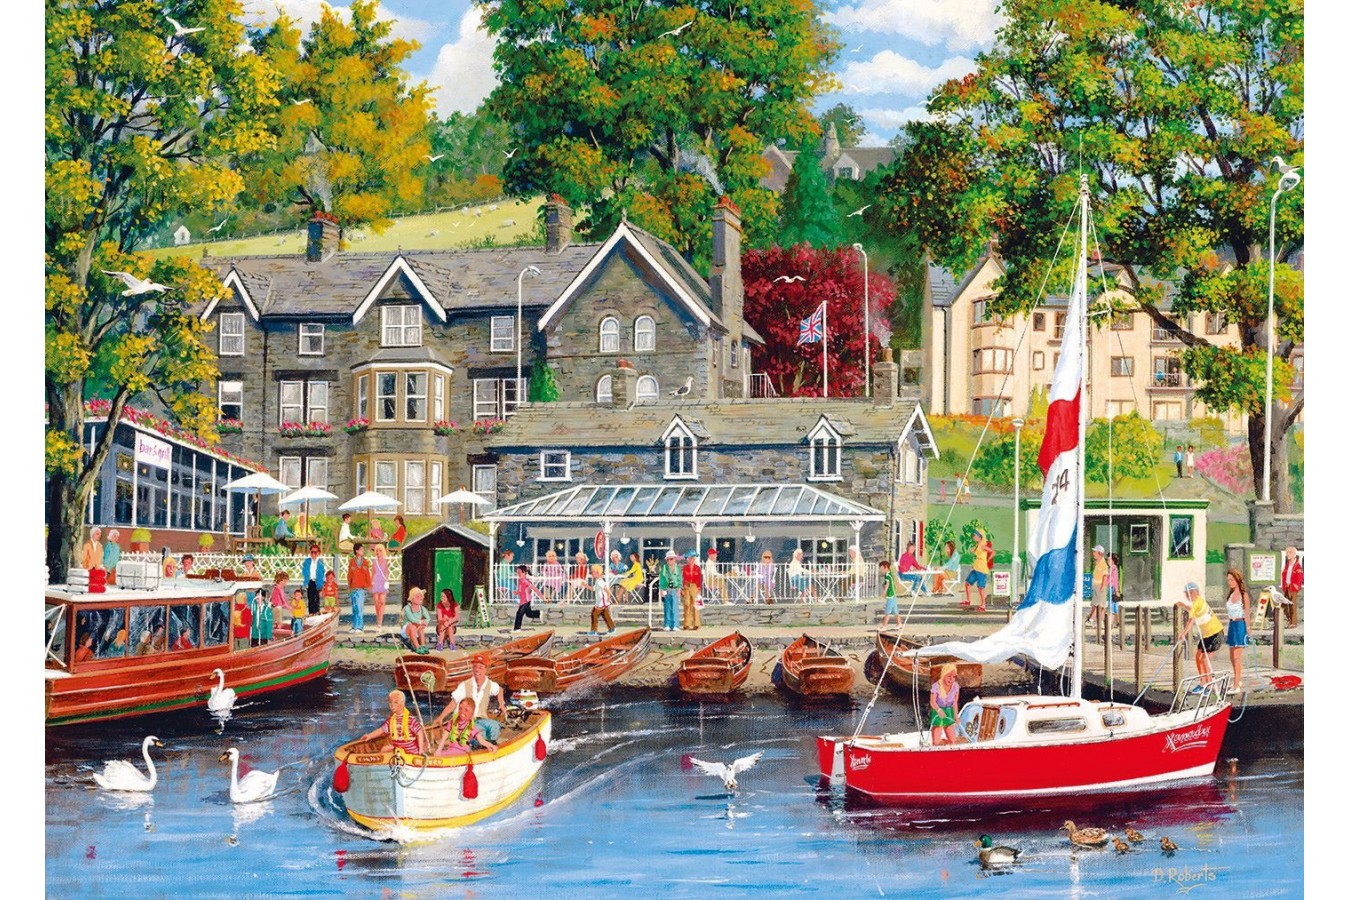 Puzzle Gibsons - Summer in Ambleside, 1000 piese (57587)